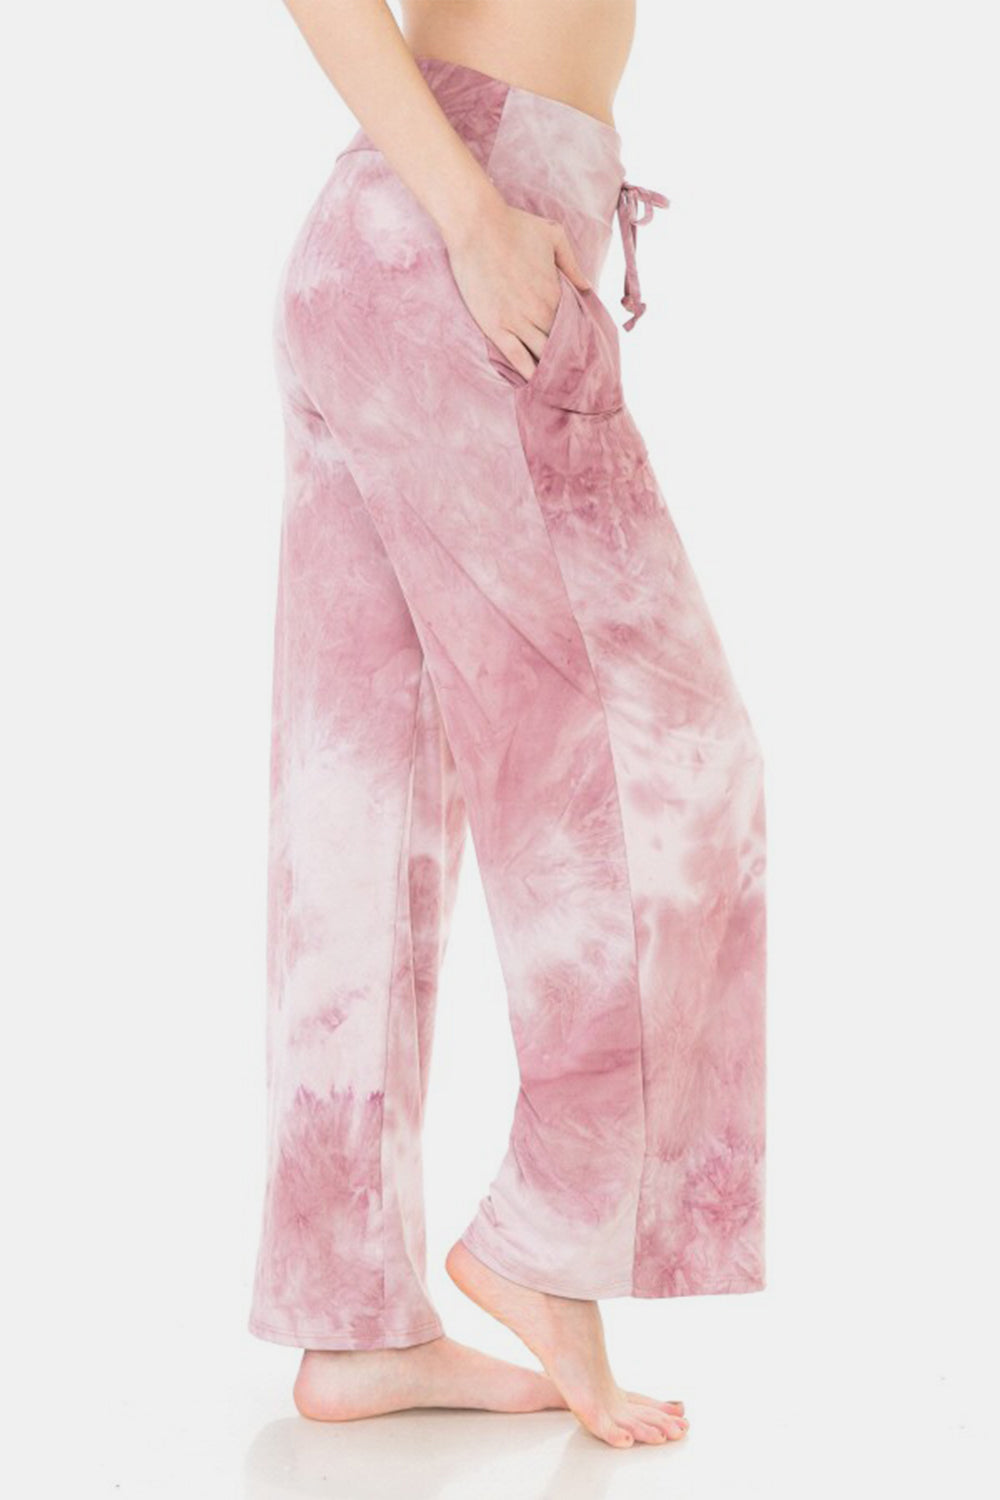 Misty Rose Leggings Depot Buttery Soft Printed Drawstring Pants Sentient Beauty Fashions Apparel &amp; Accessories